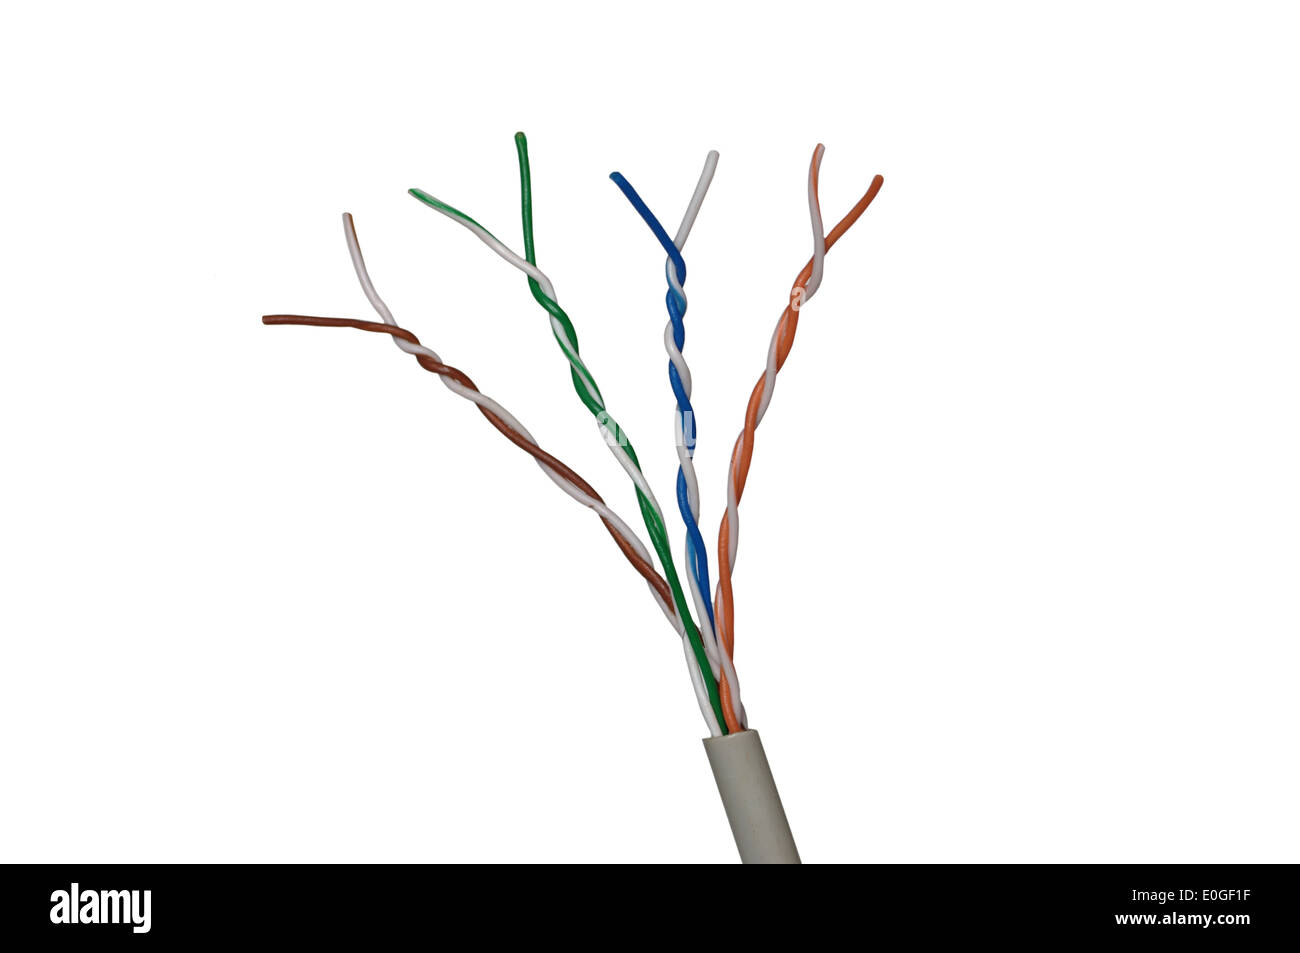 internet cable on white background Stock Photo